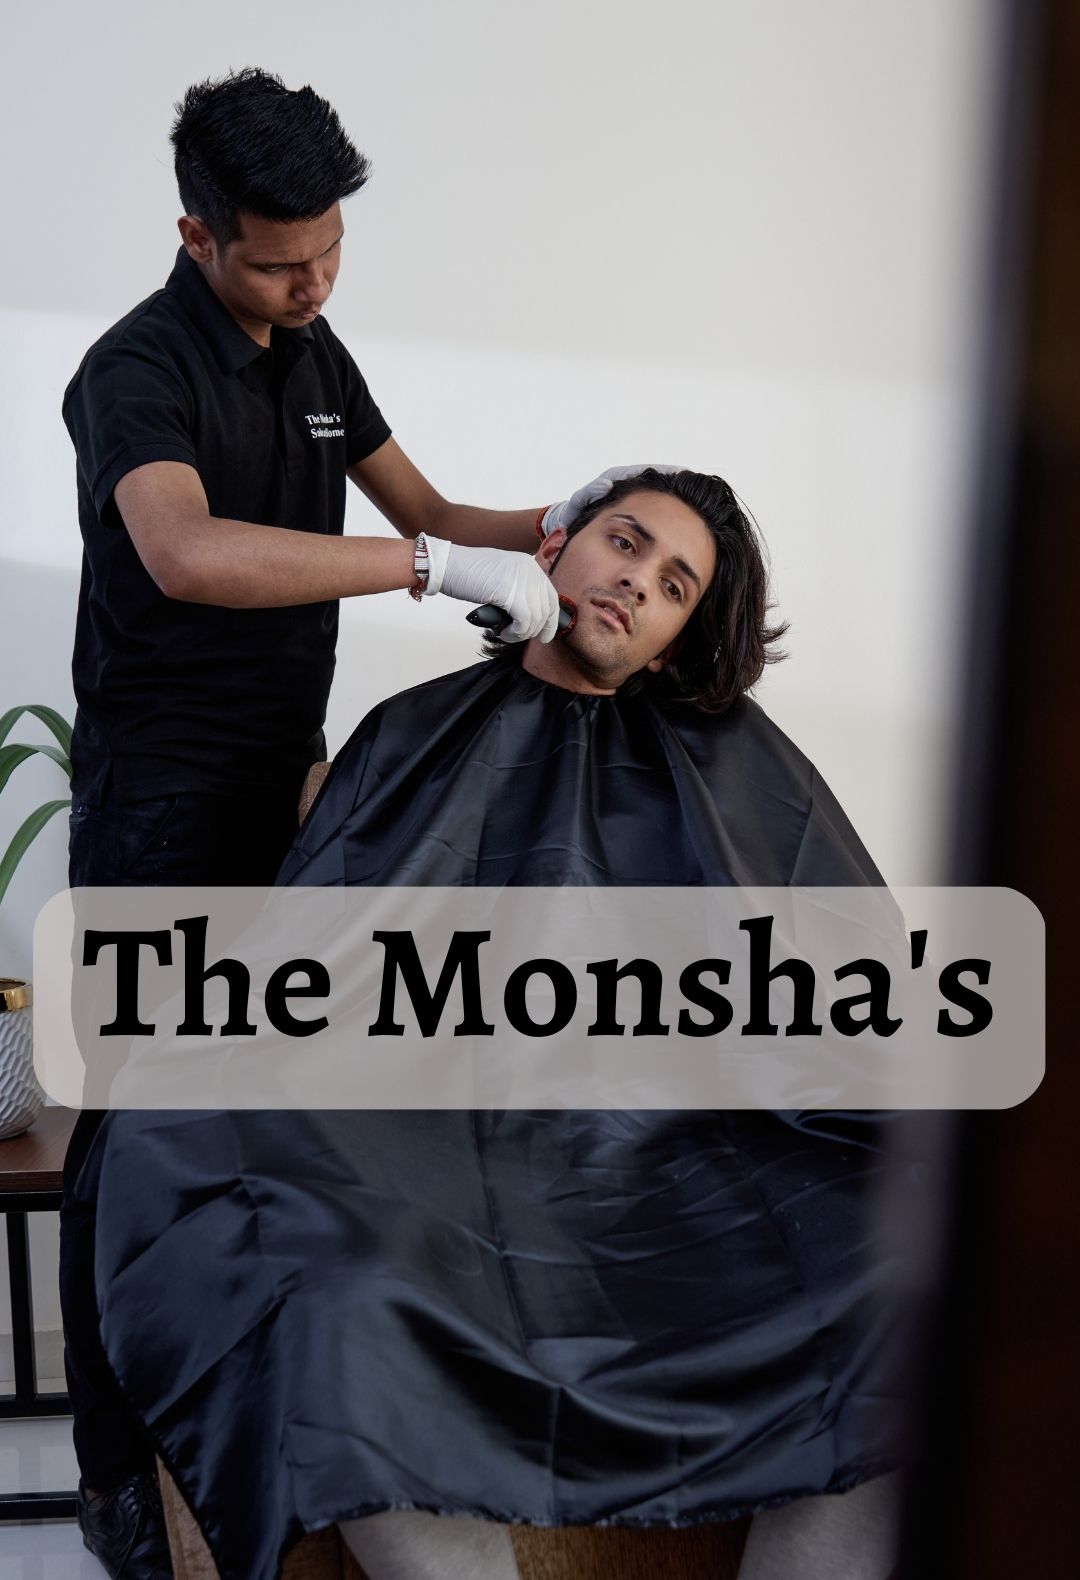  Get Best Salon Services at Home In Delhi NCR | The Monsha's